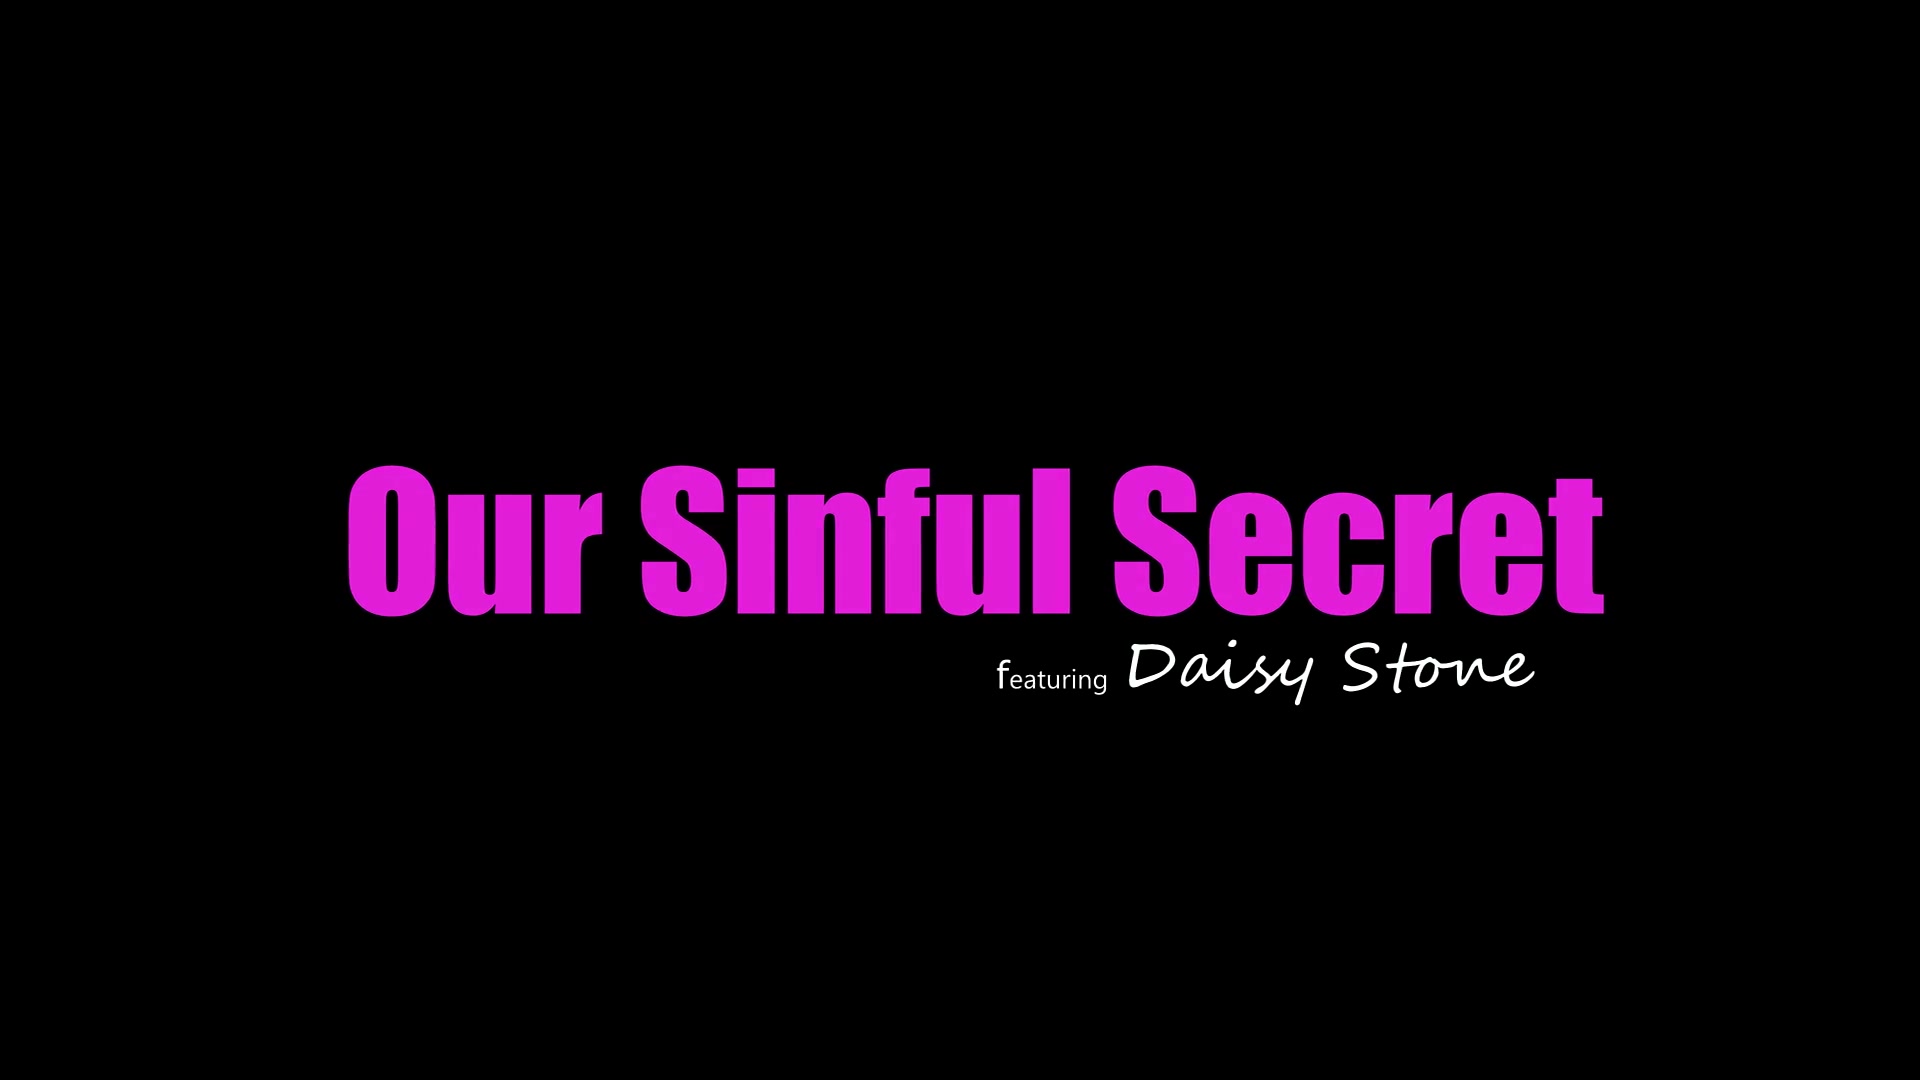 This is our sinful secret